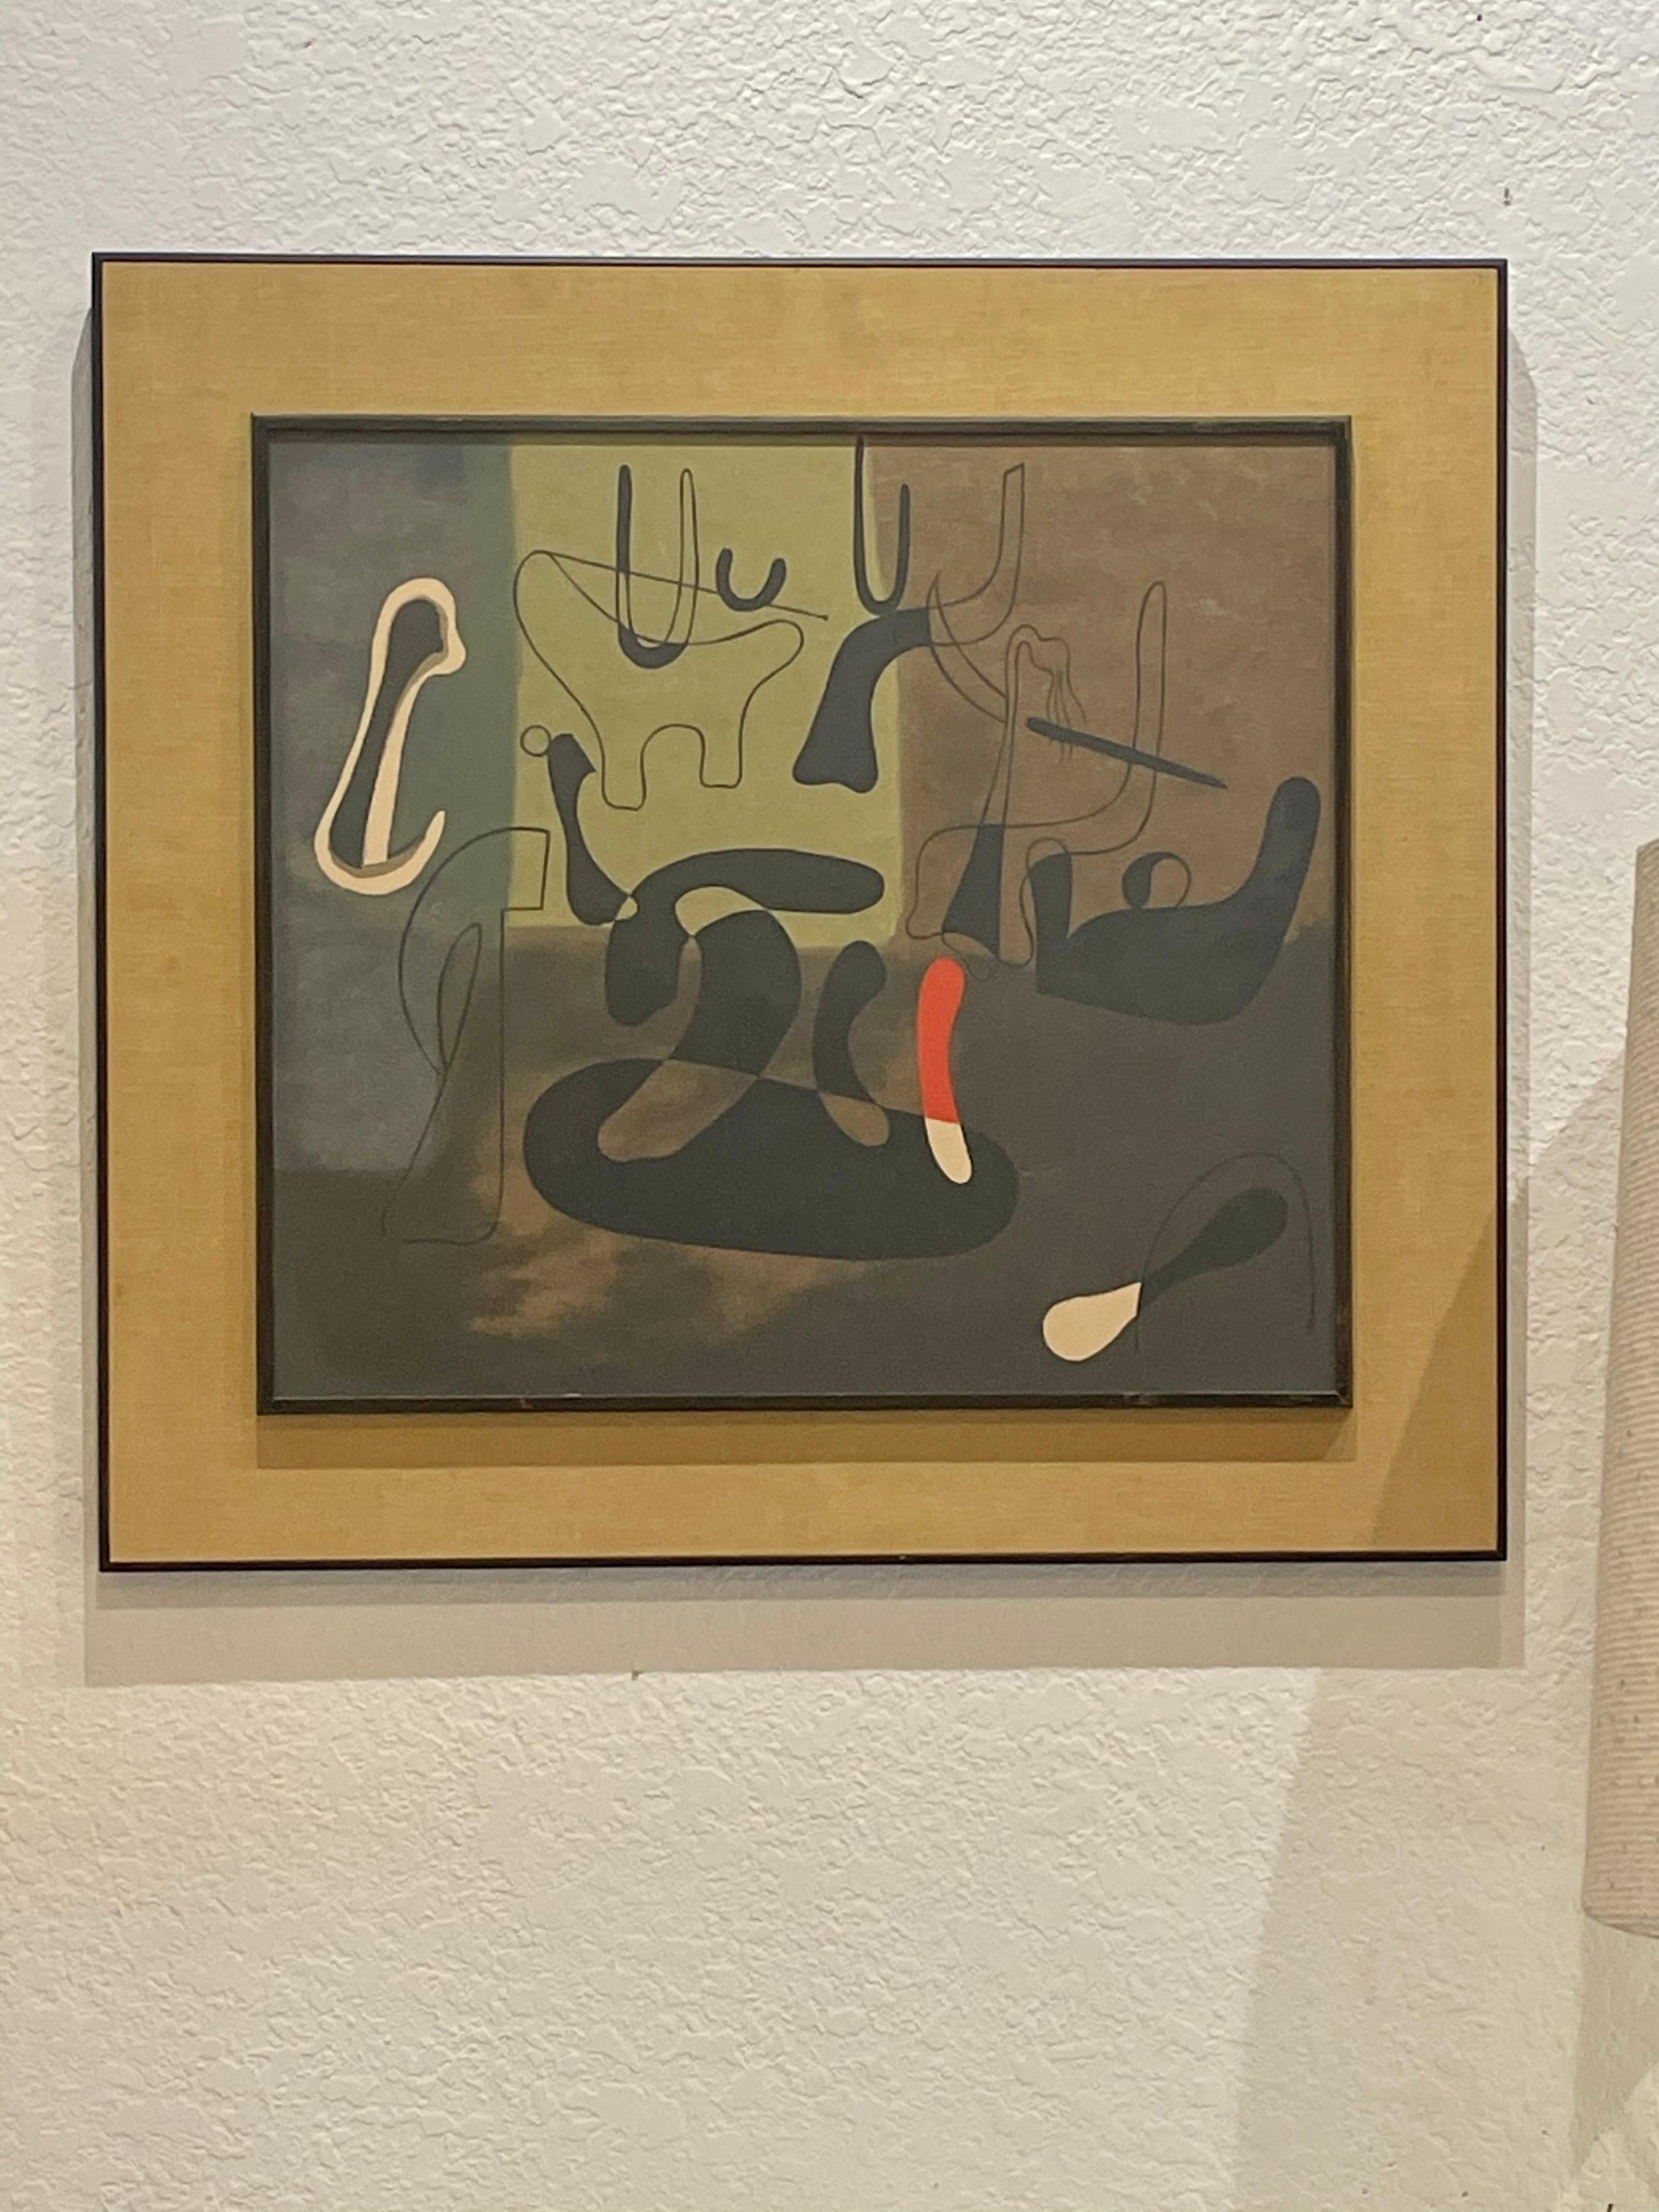 Beautiful vintage print by Joan Miro, nicely framed in black wood edge and grasscloth mat with glass.